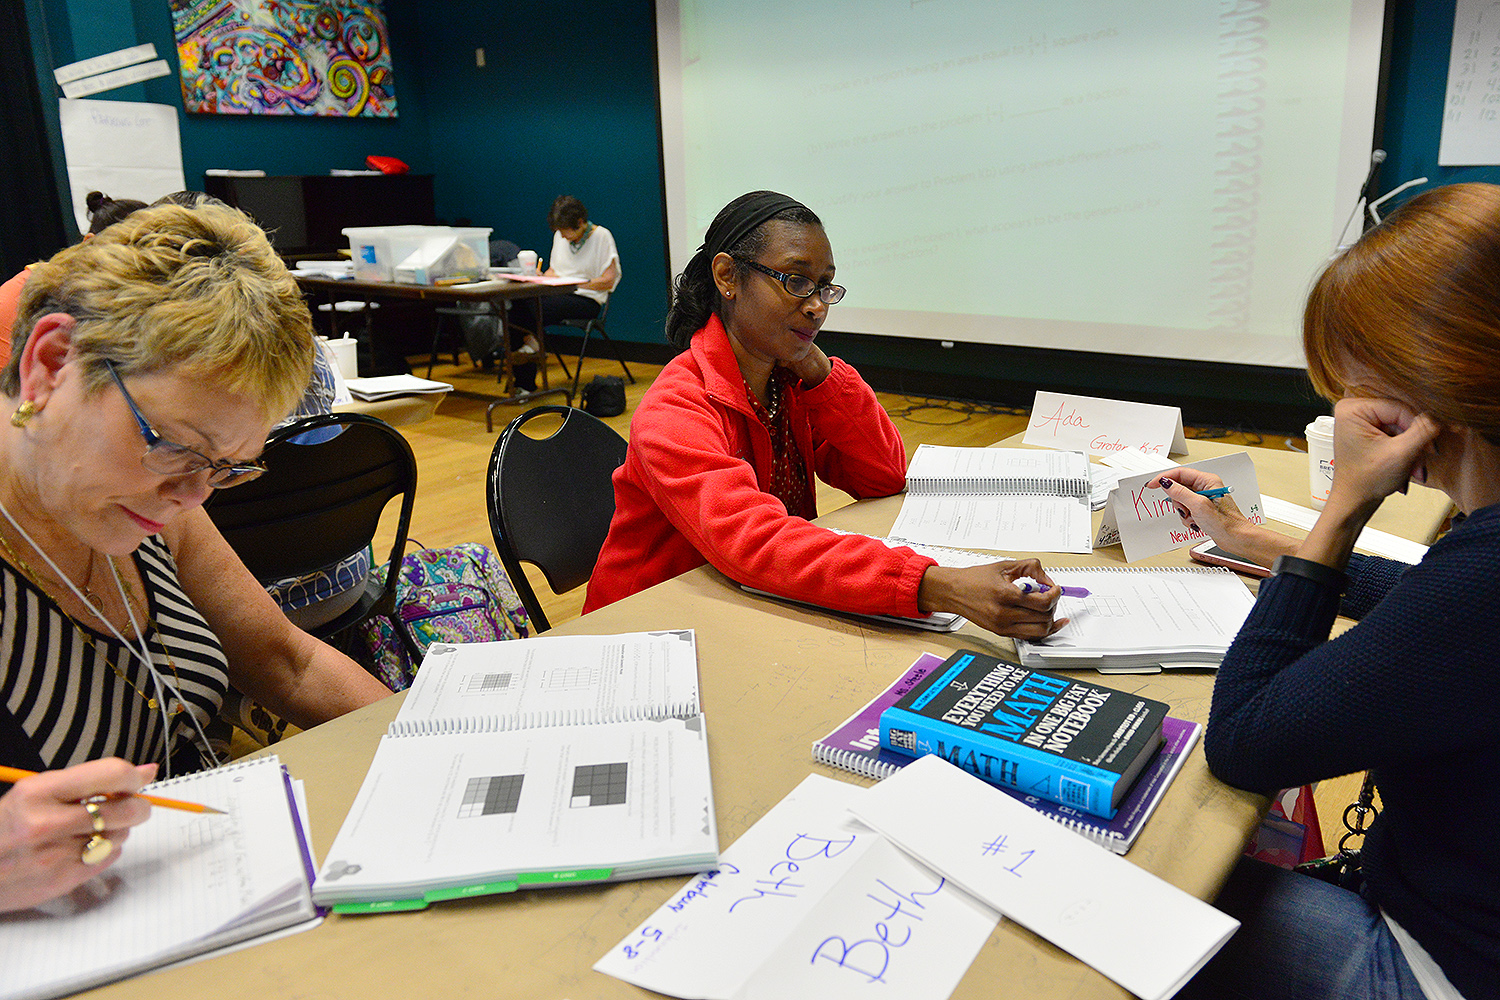 Intel Math is an intensive, 80-hour, content-based course that helps local teachers deepen their own understanding of K-8 math content and connections between concepts. 